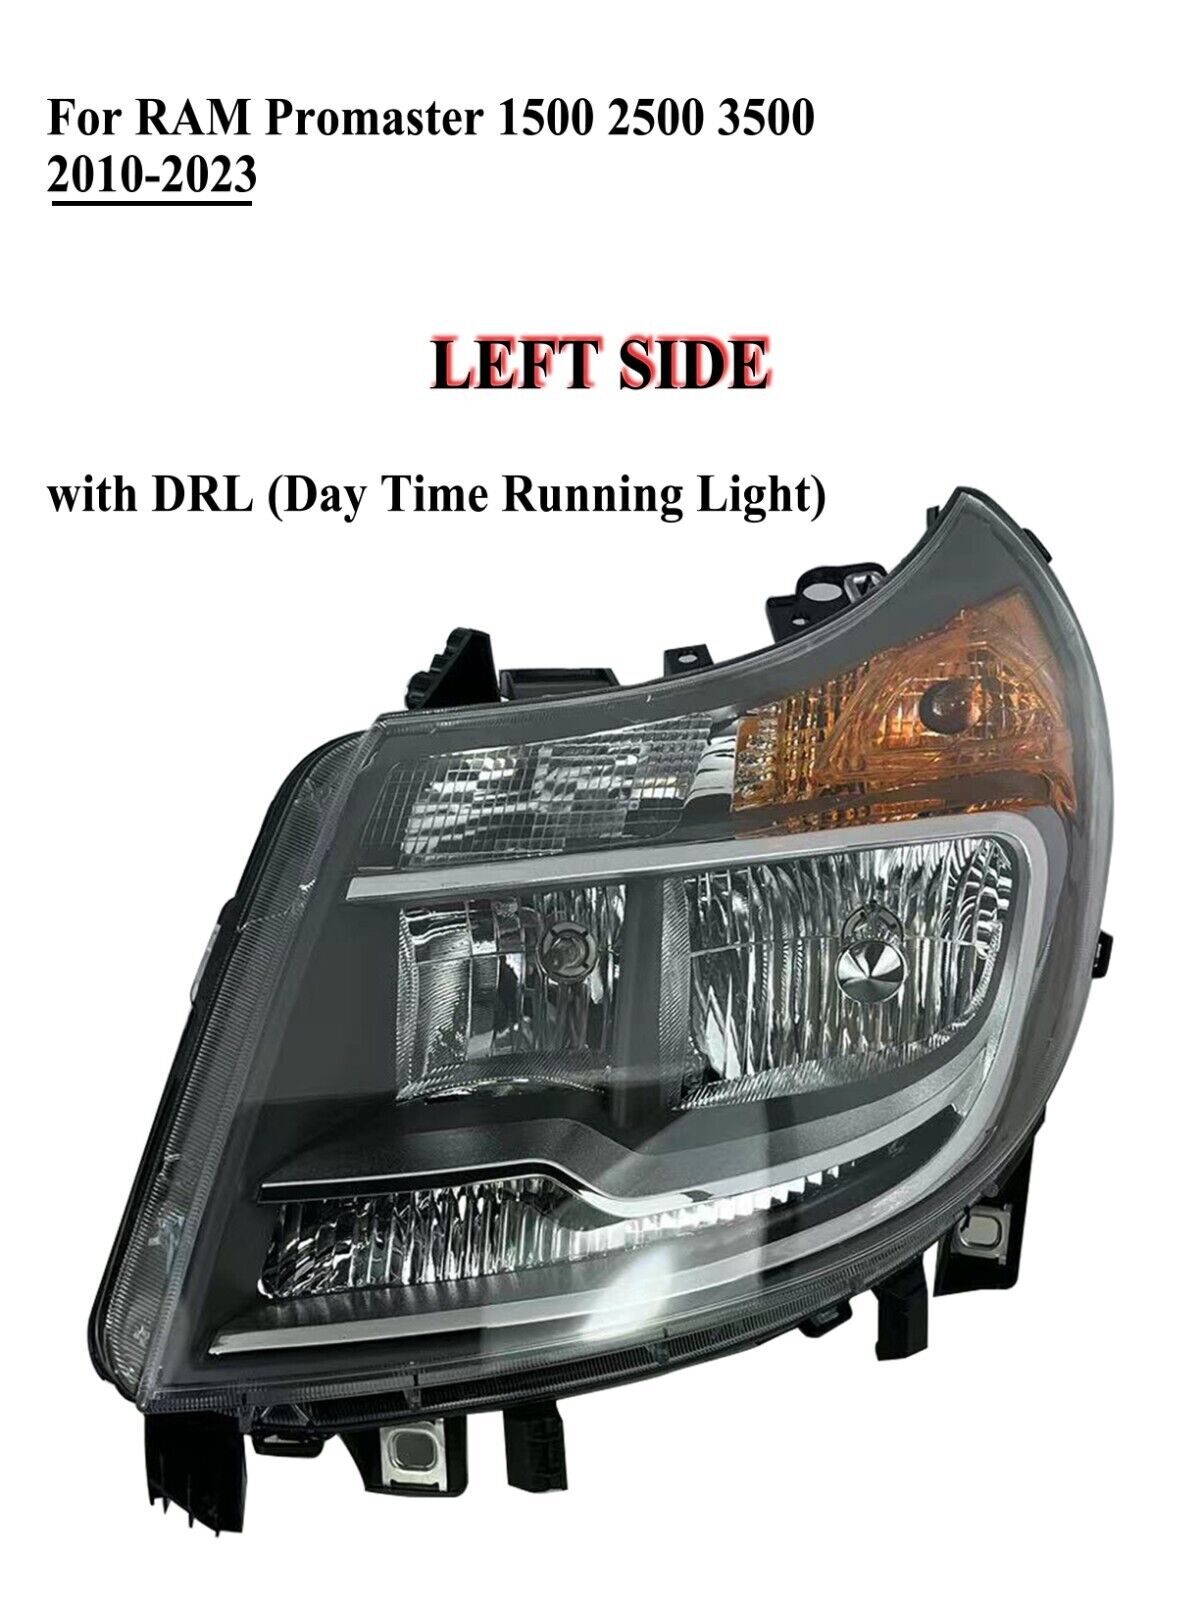 Driver Left Side Headlamp Headlight with DRL for 2010-2022 RAM Promaster